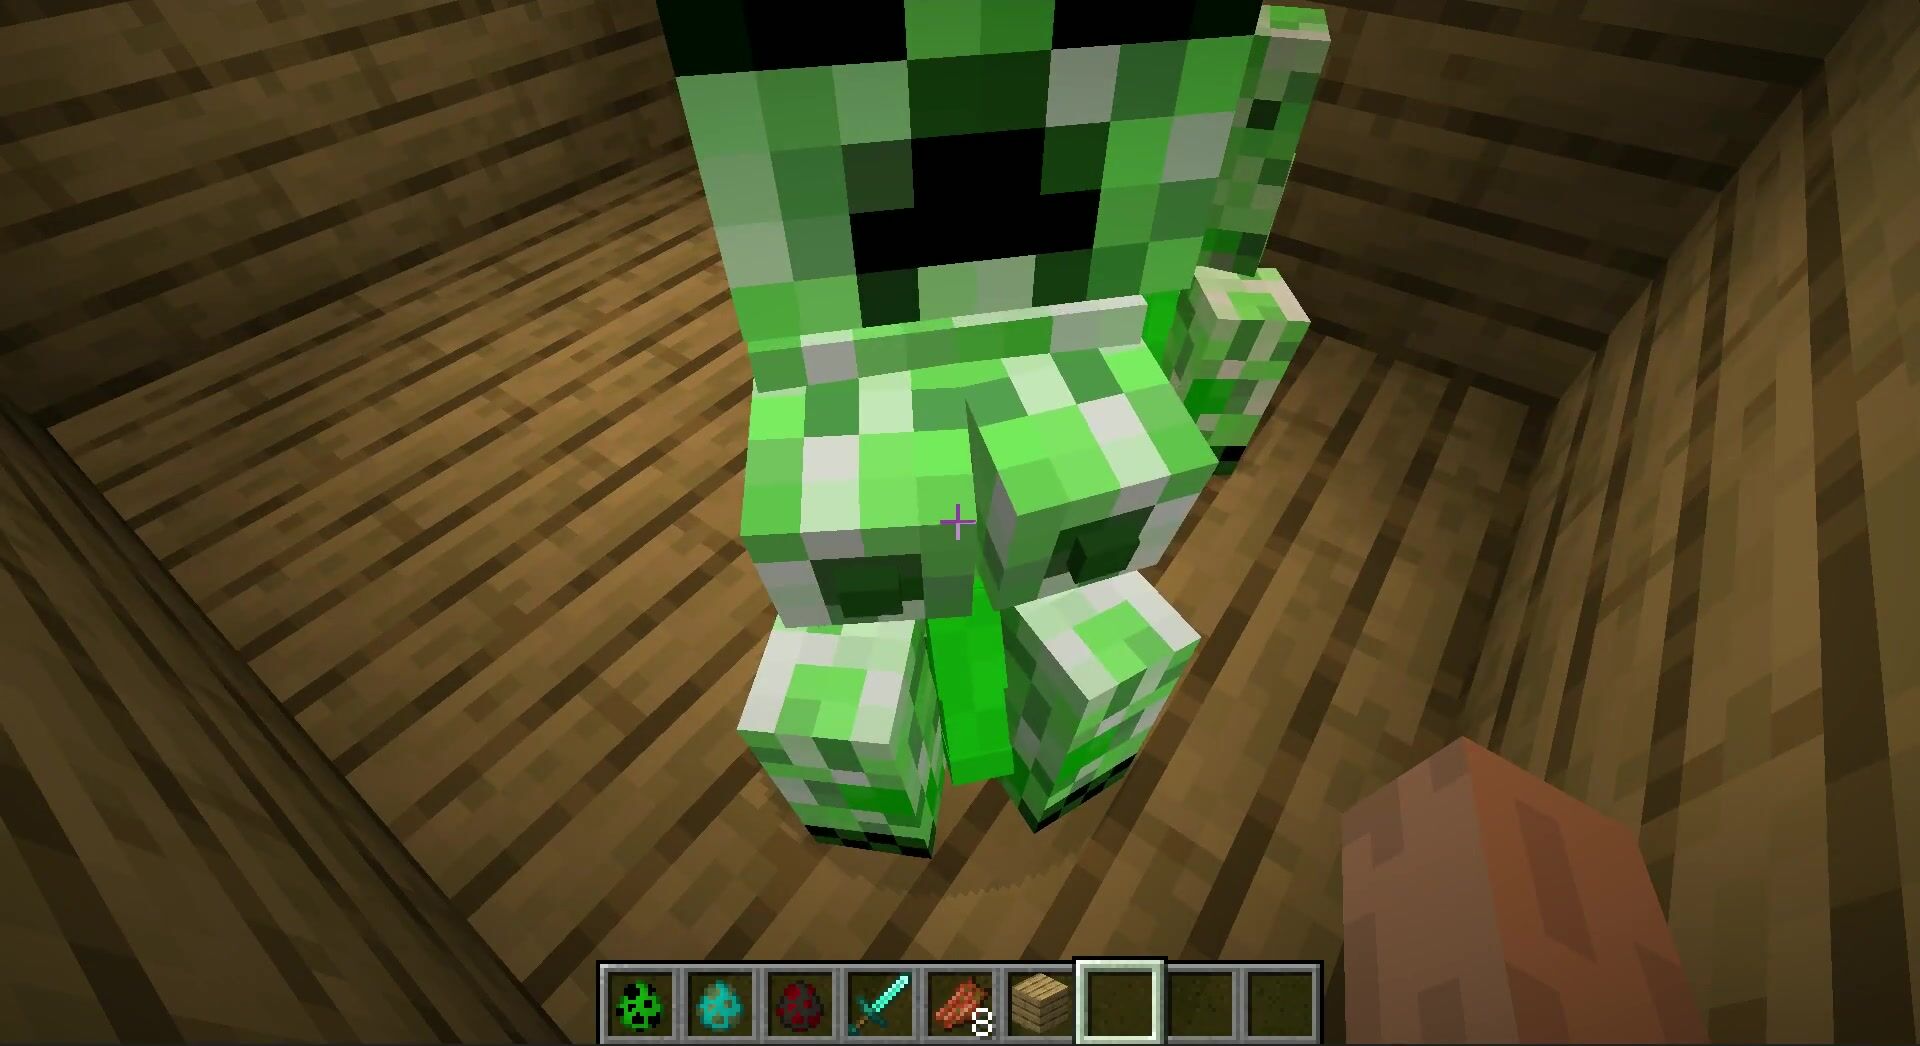 Minecraft Porn Mod Review: Sexy Creepers With Big Tits - FAPCAT